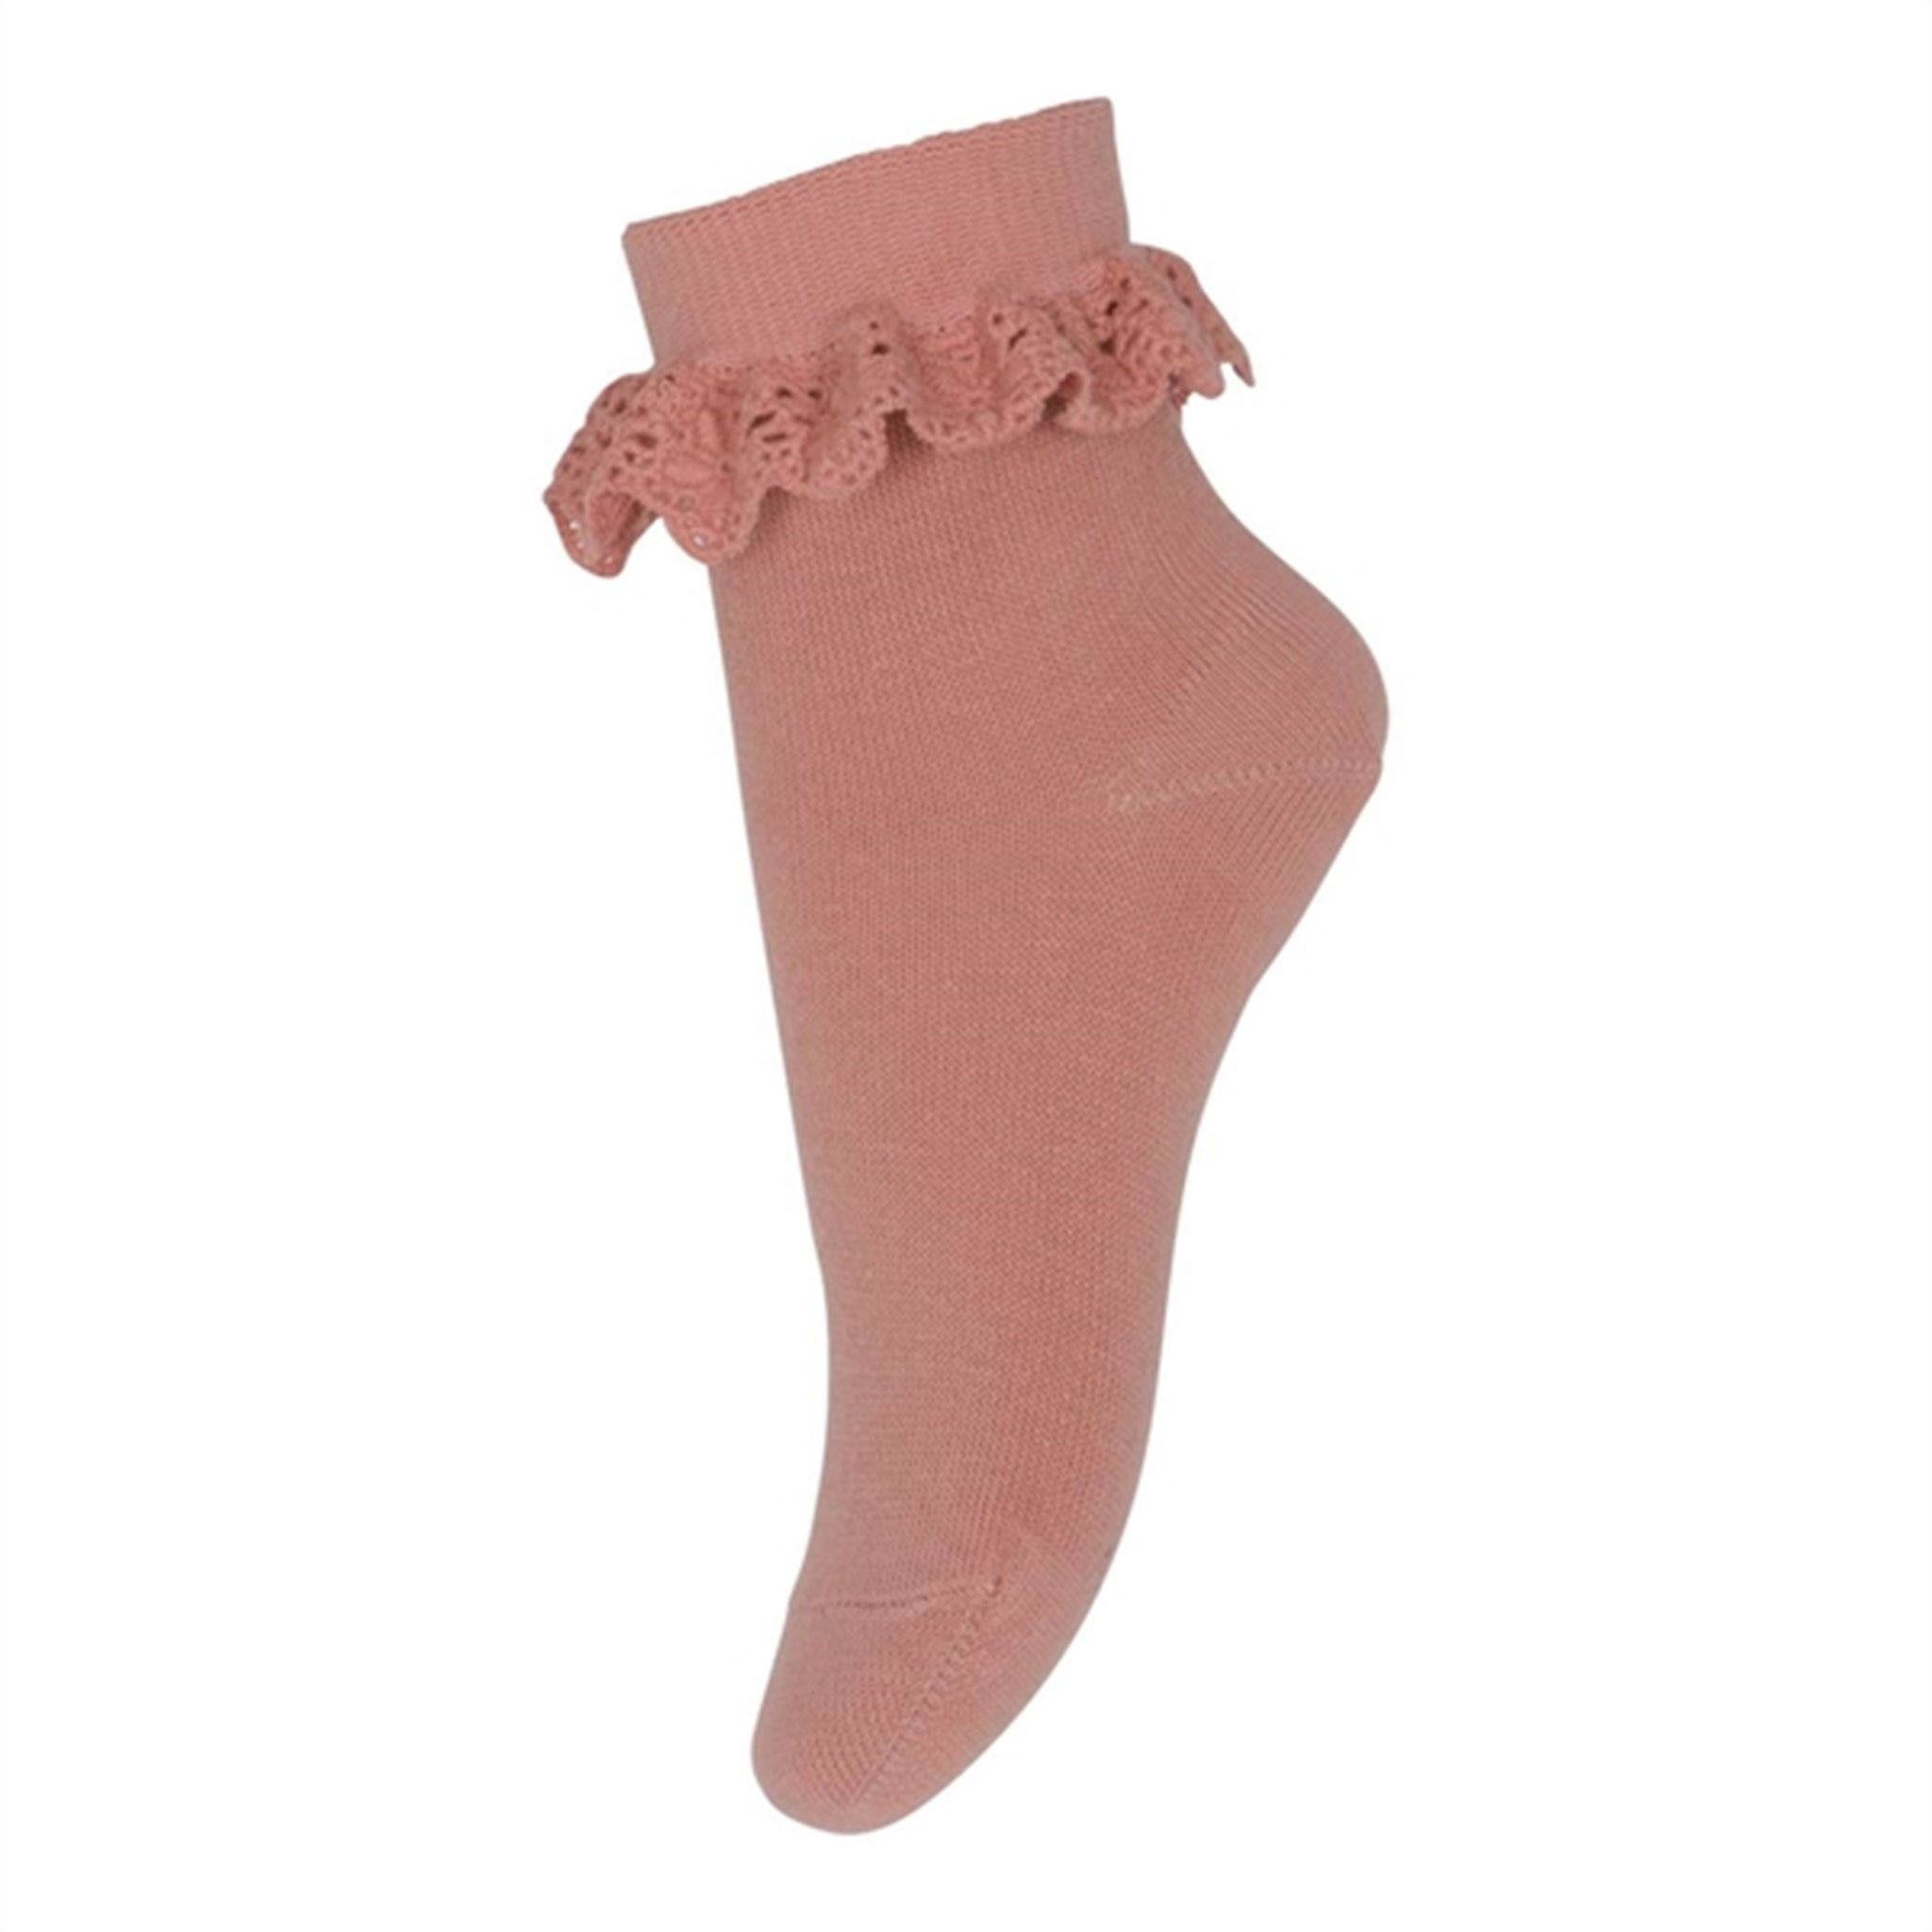 MP 527 Cotton Socks With Lace 4260 Rose Dawn